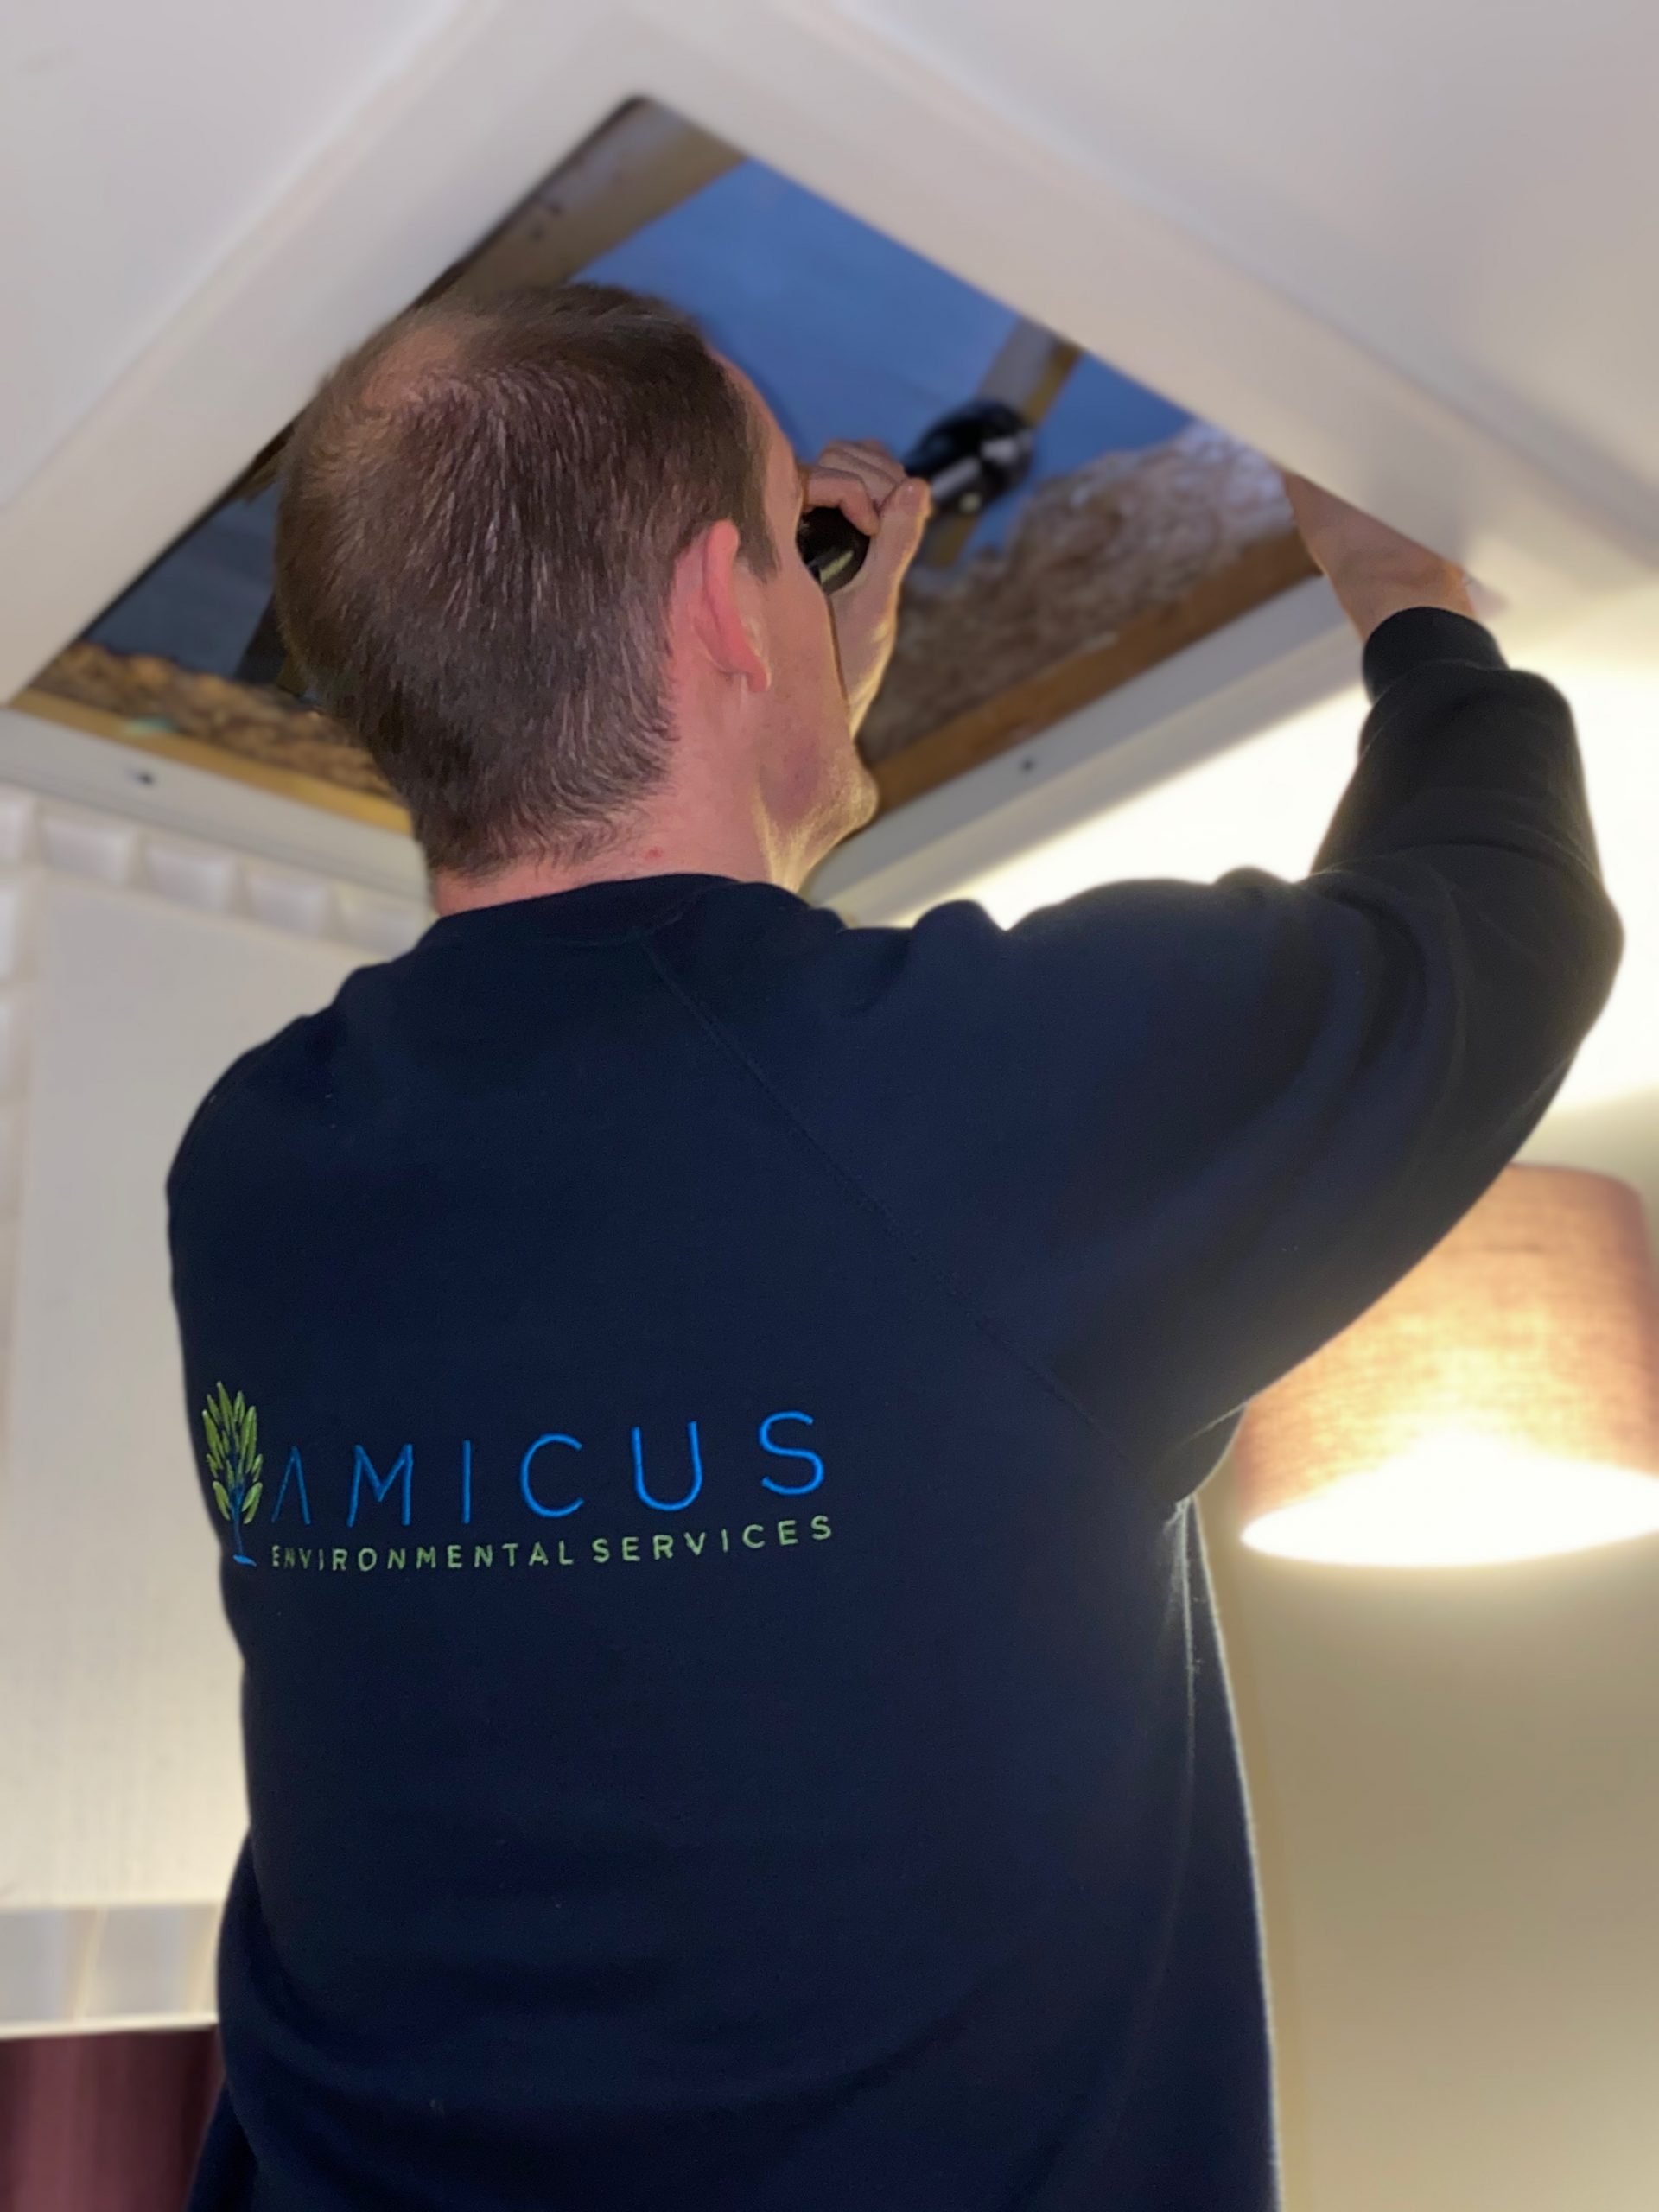 An Amicus Technician Looking for Pests